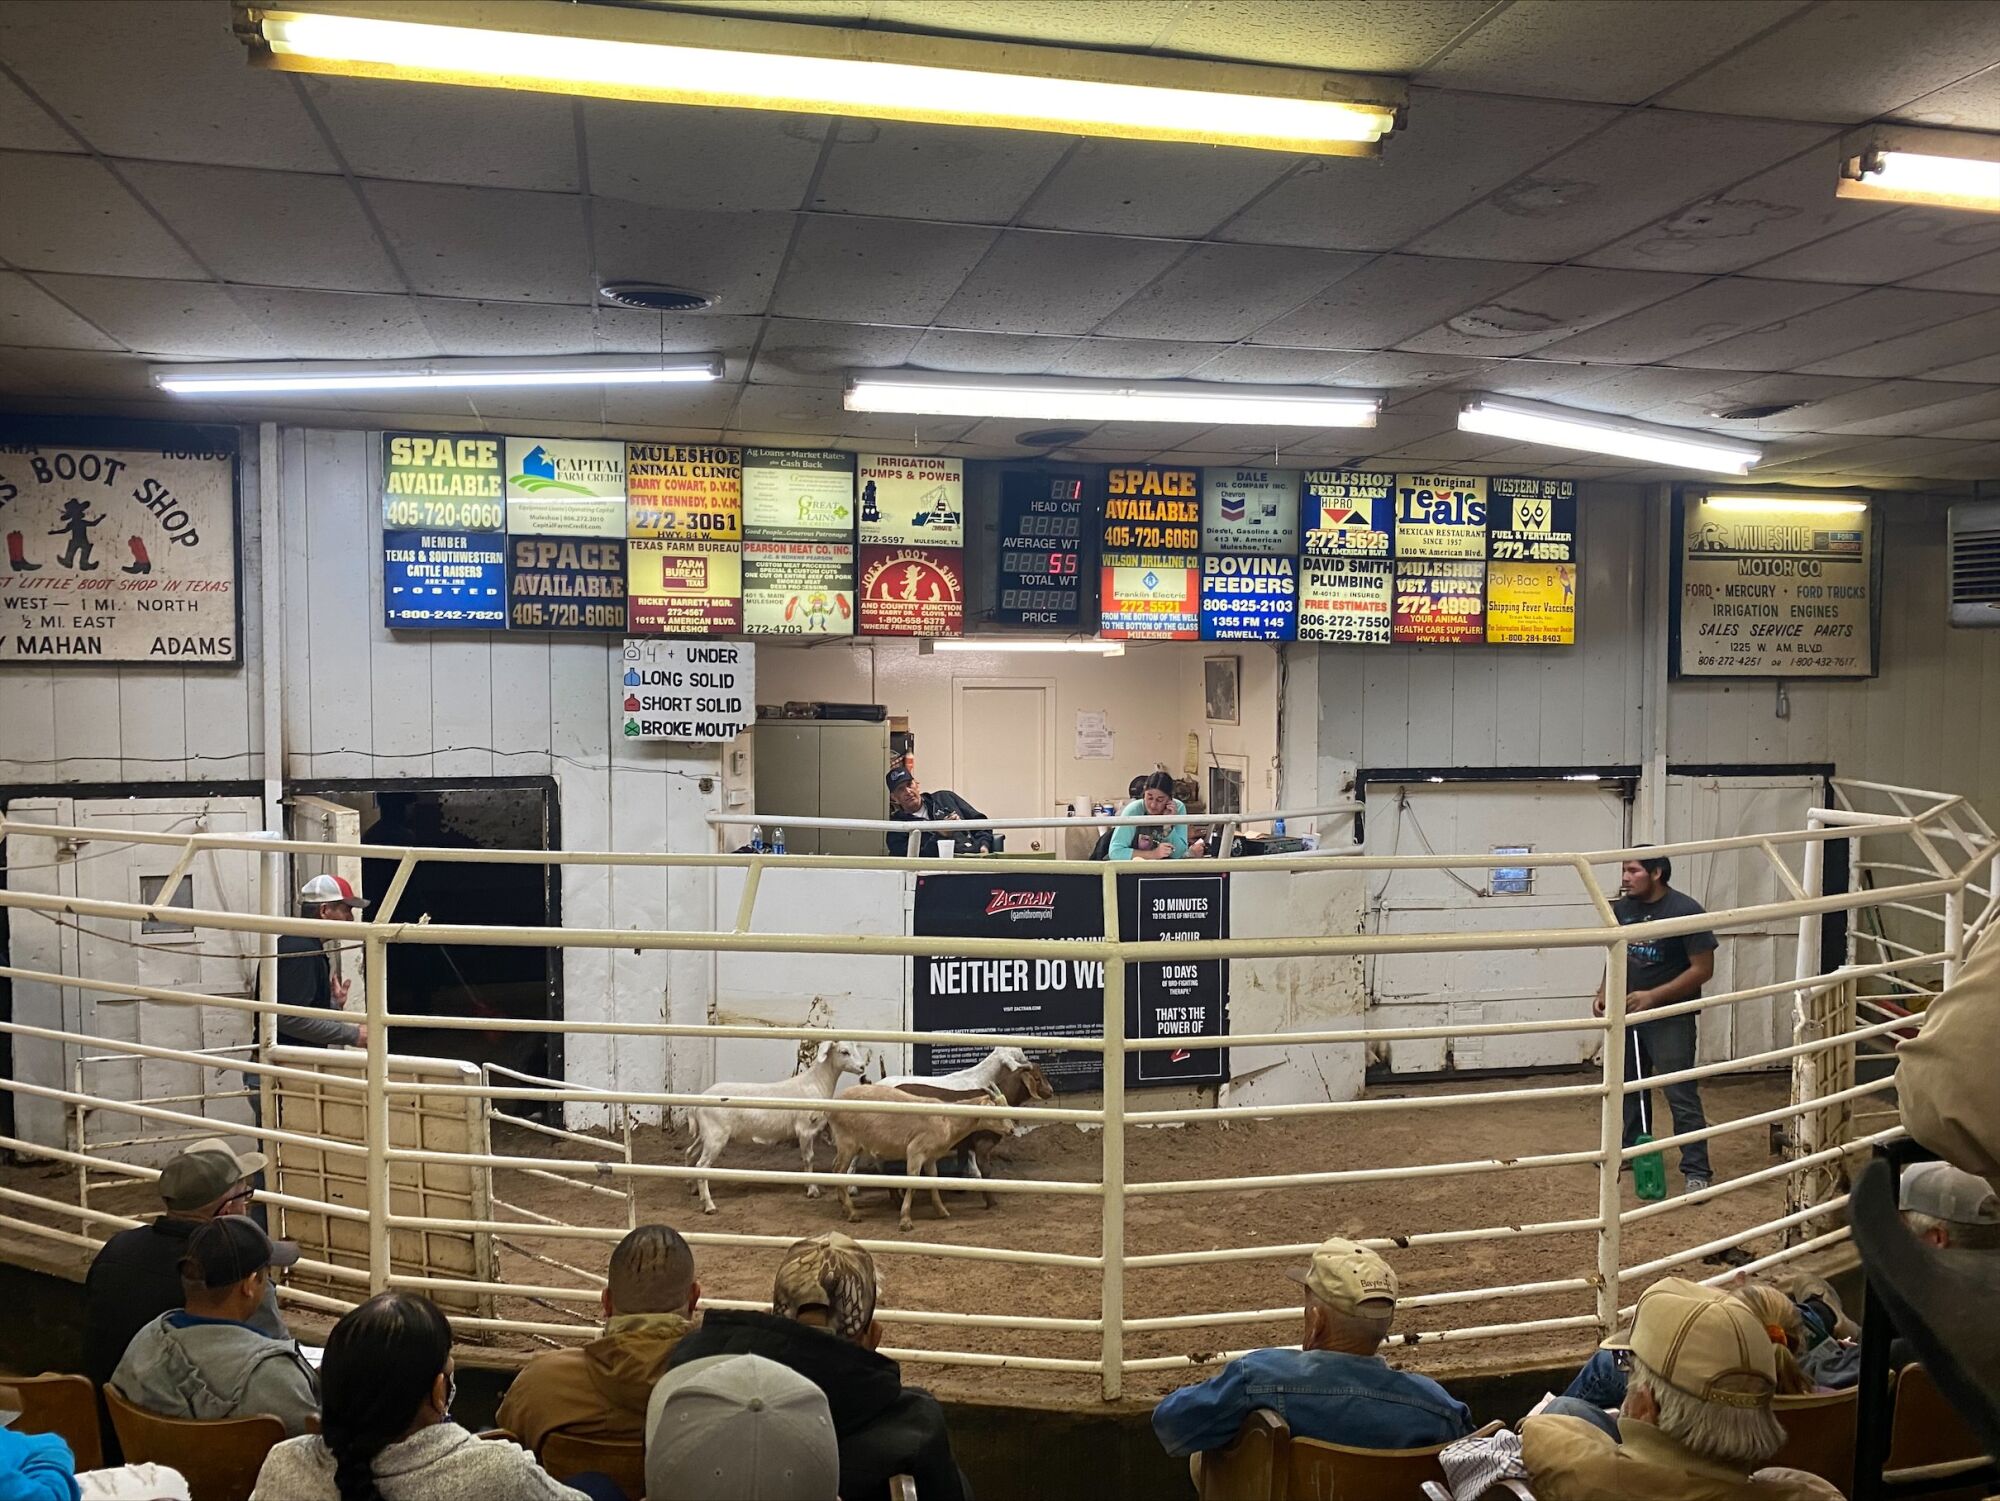 Muleshoe residents gather for a livestock auction featuring sheep, hogs and goats.